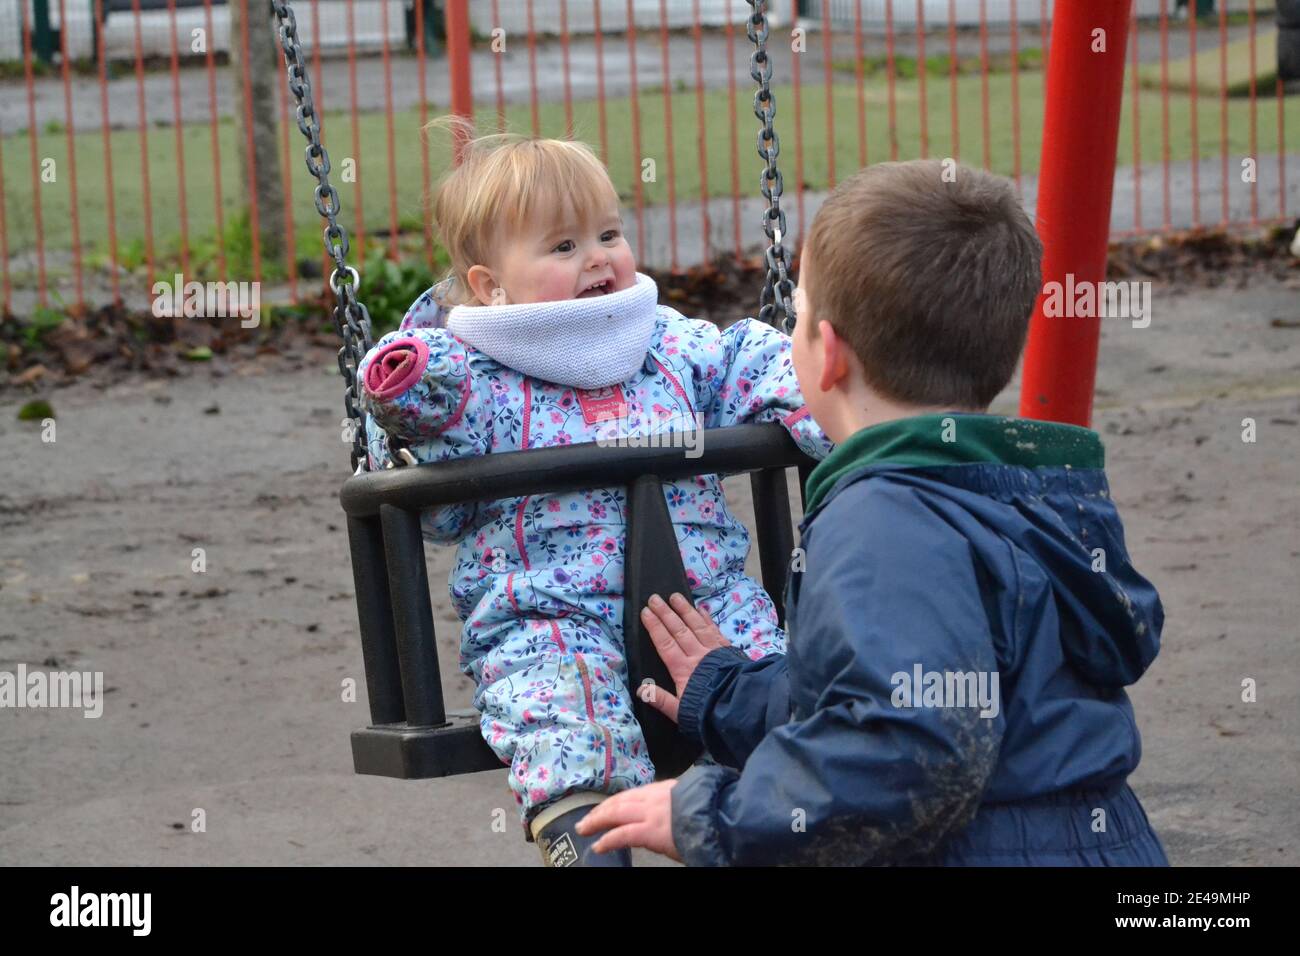 Fun At The Park - Children Playing - Siblings Playing Together - Playing On The Swings - Brother And Sister - UK Stock Photo